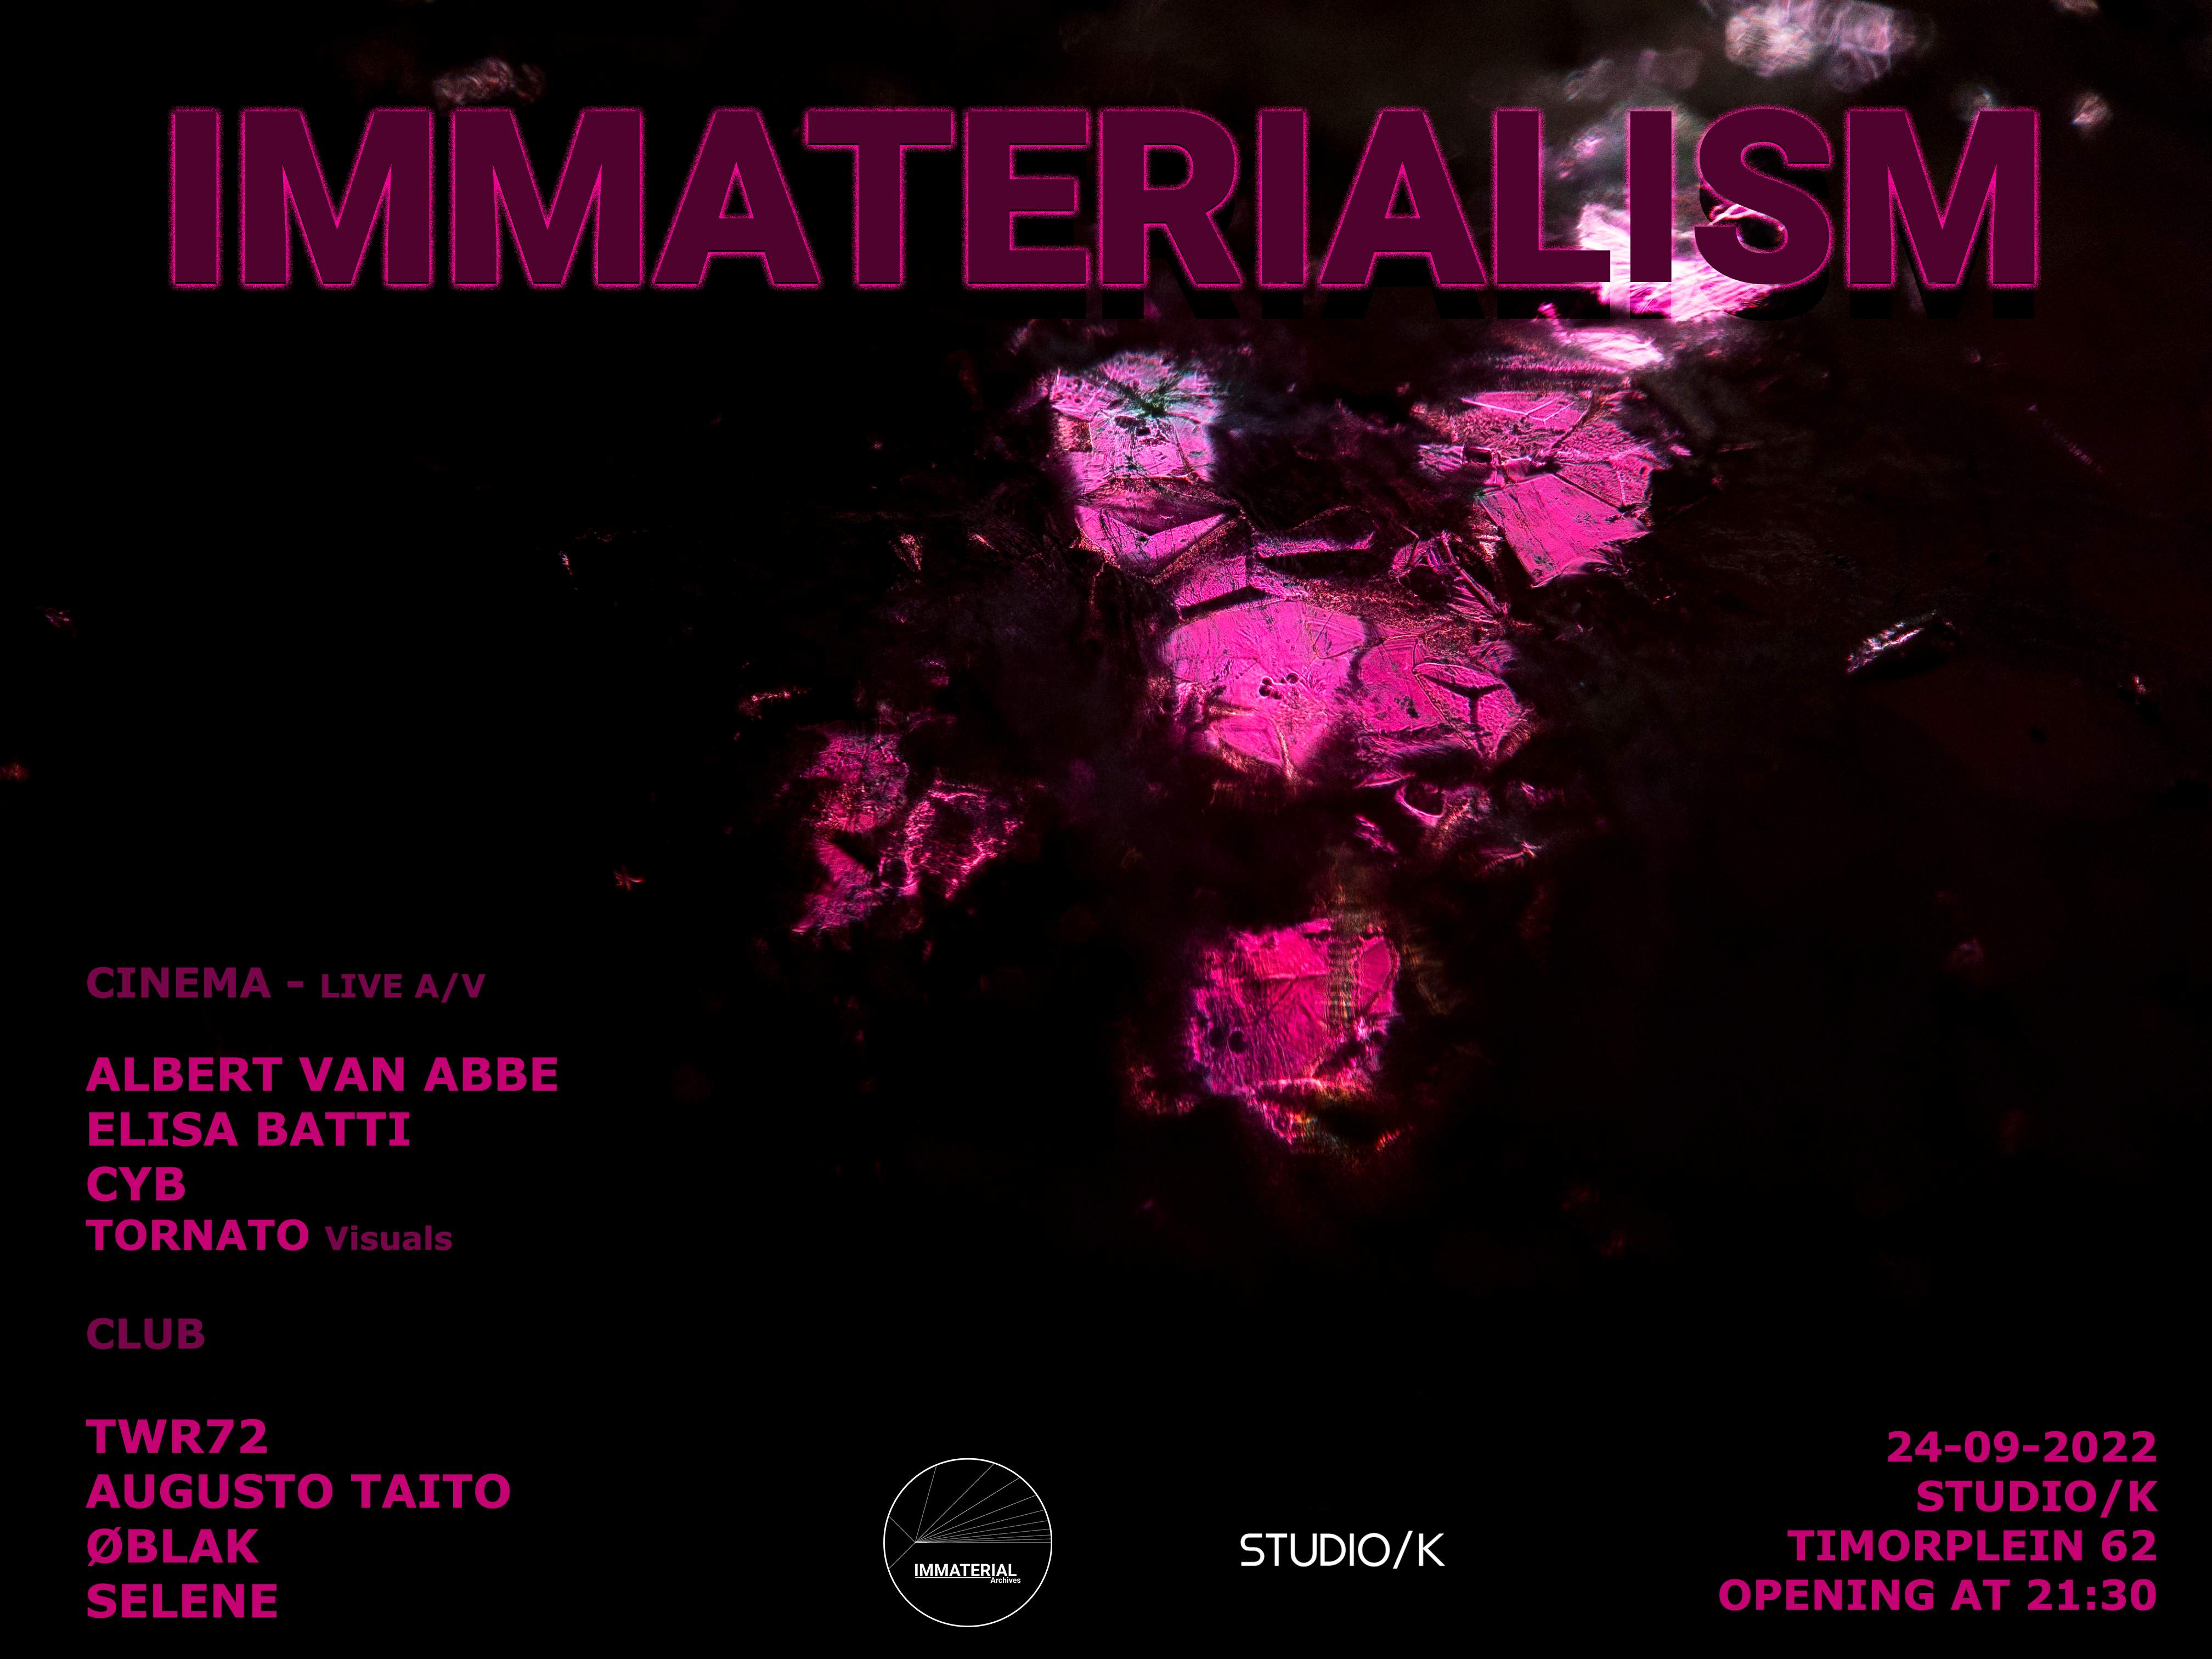 IMMATERIALISM - Immaterial.Archives Showcase - Página frontal